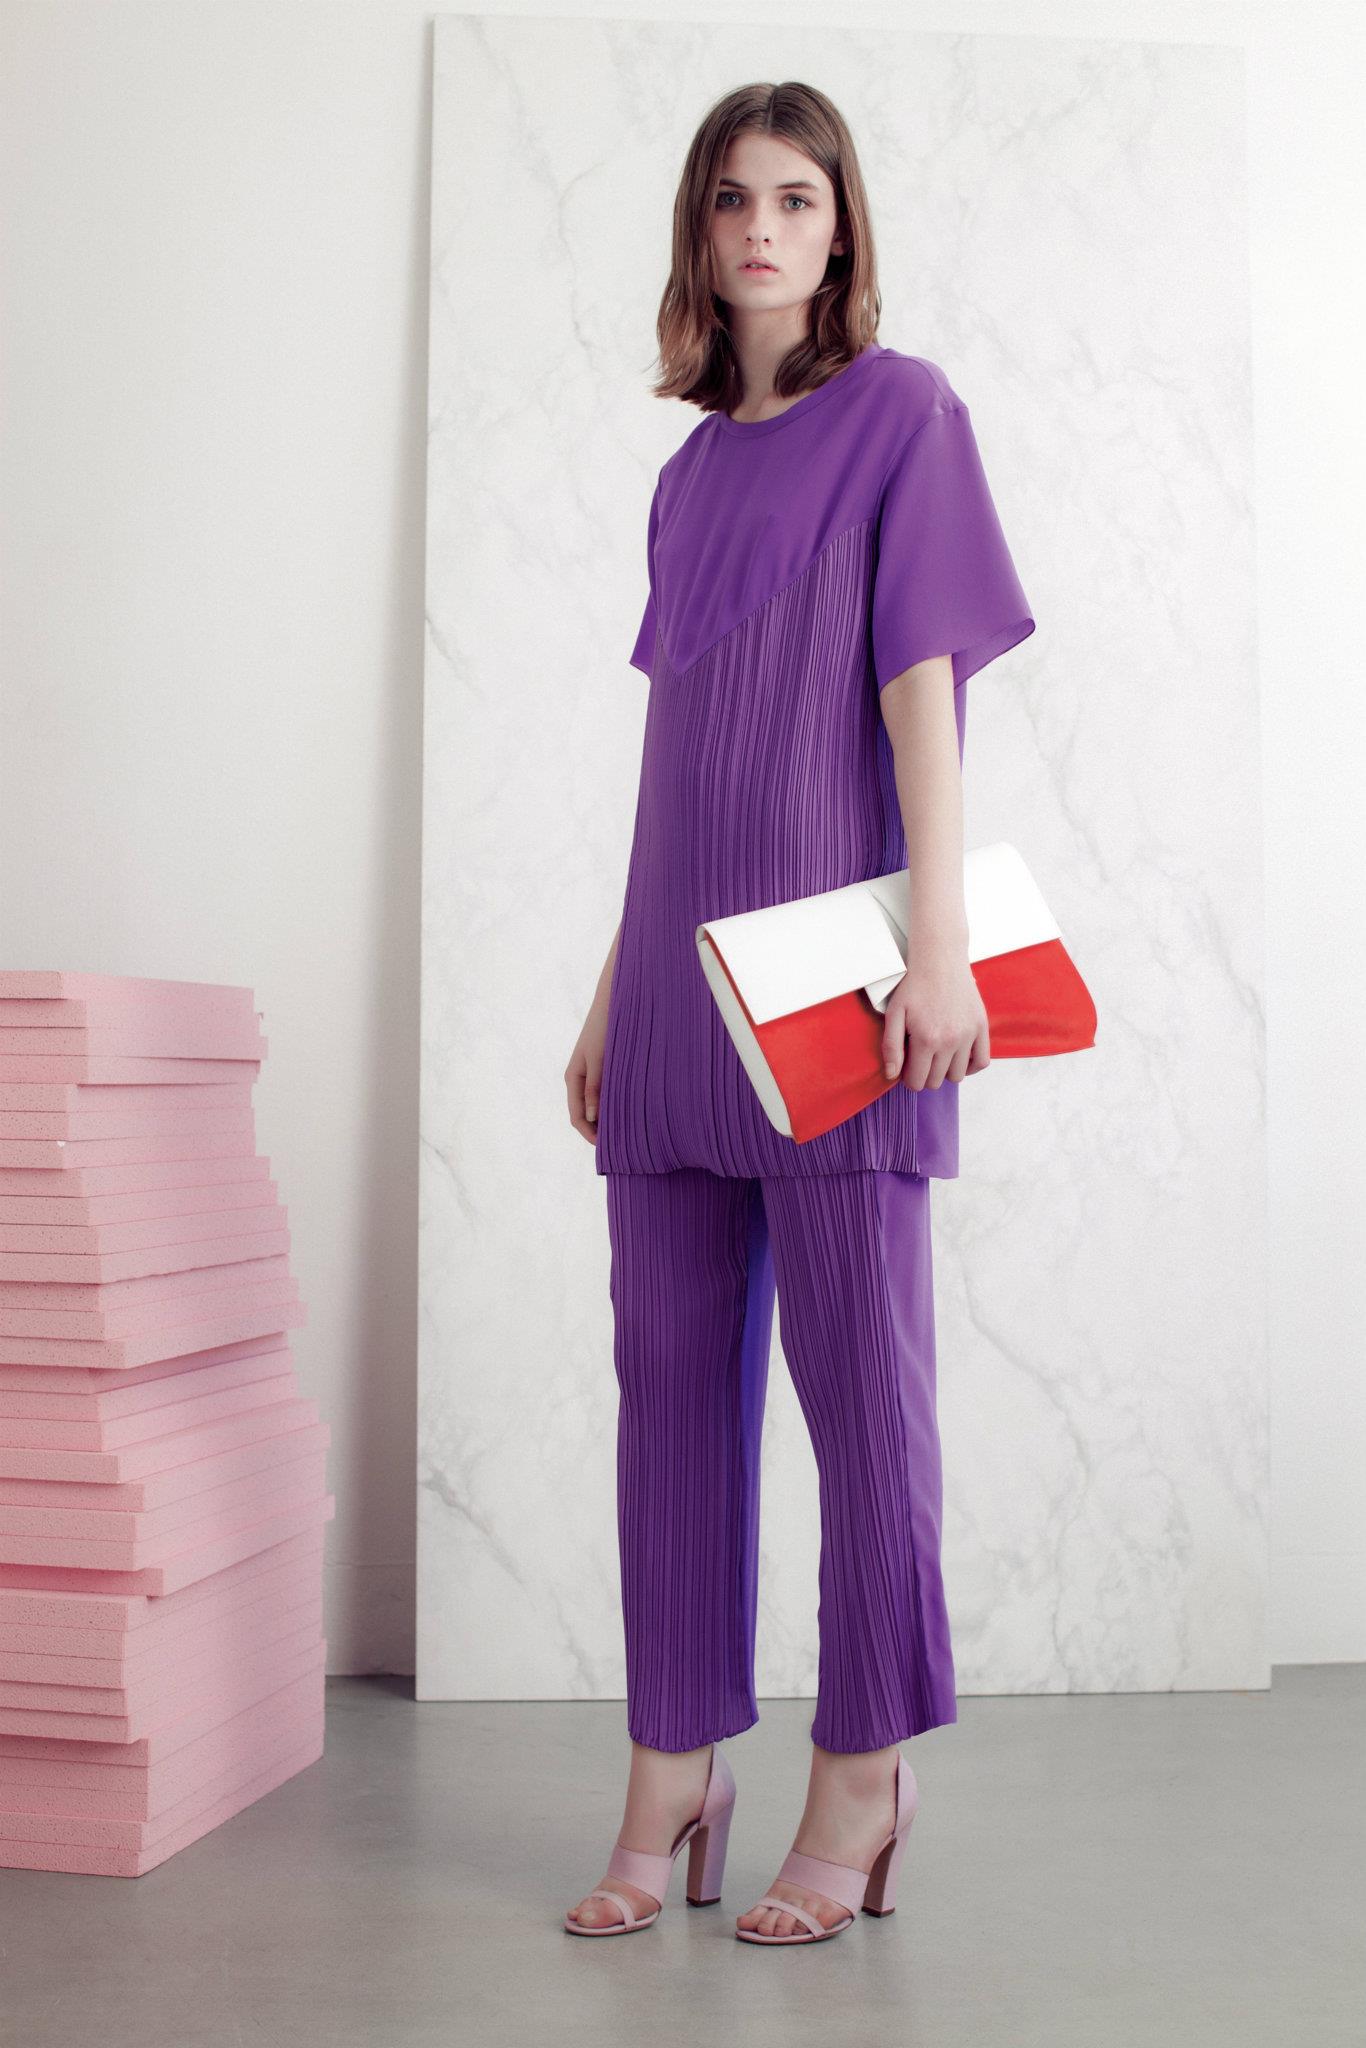 Vionnet Spring 2013 Collection 5